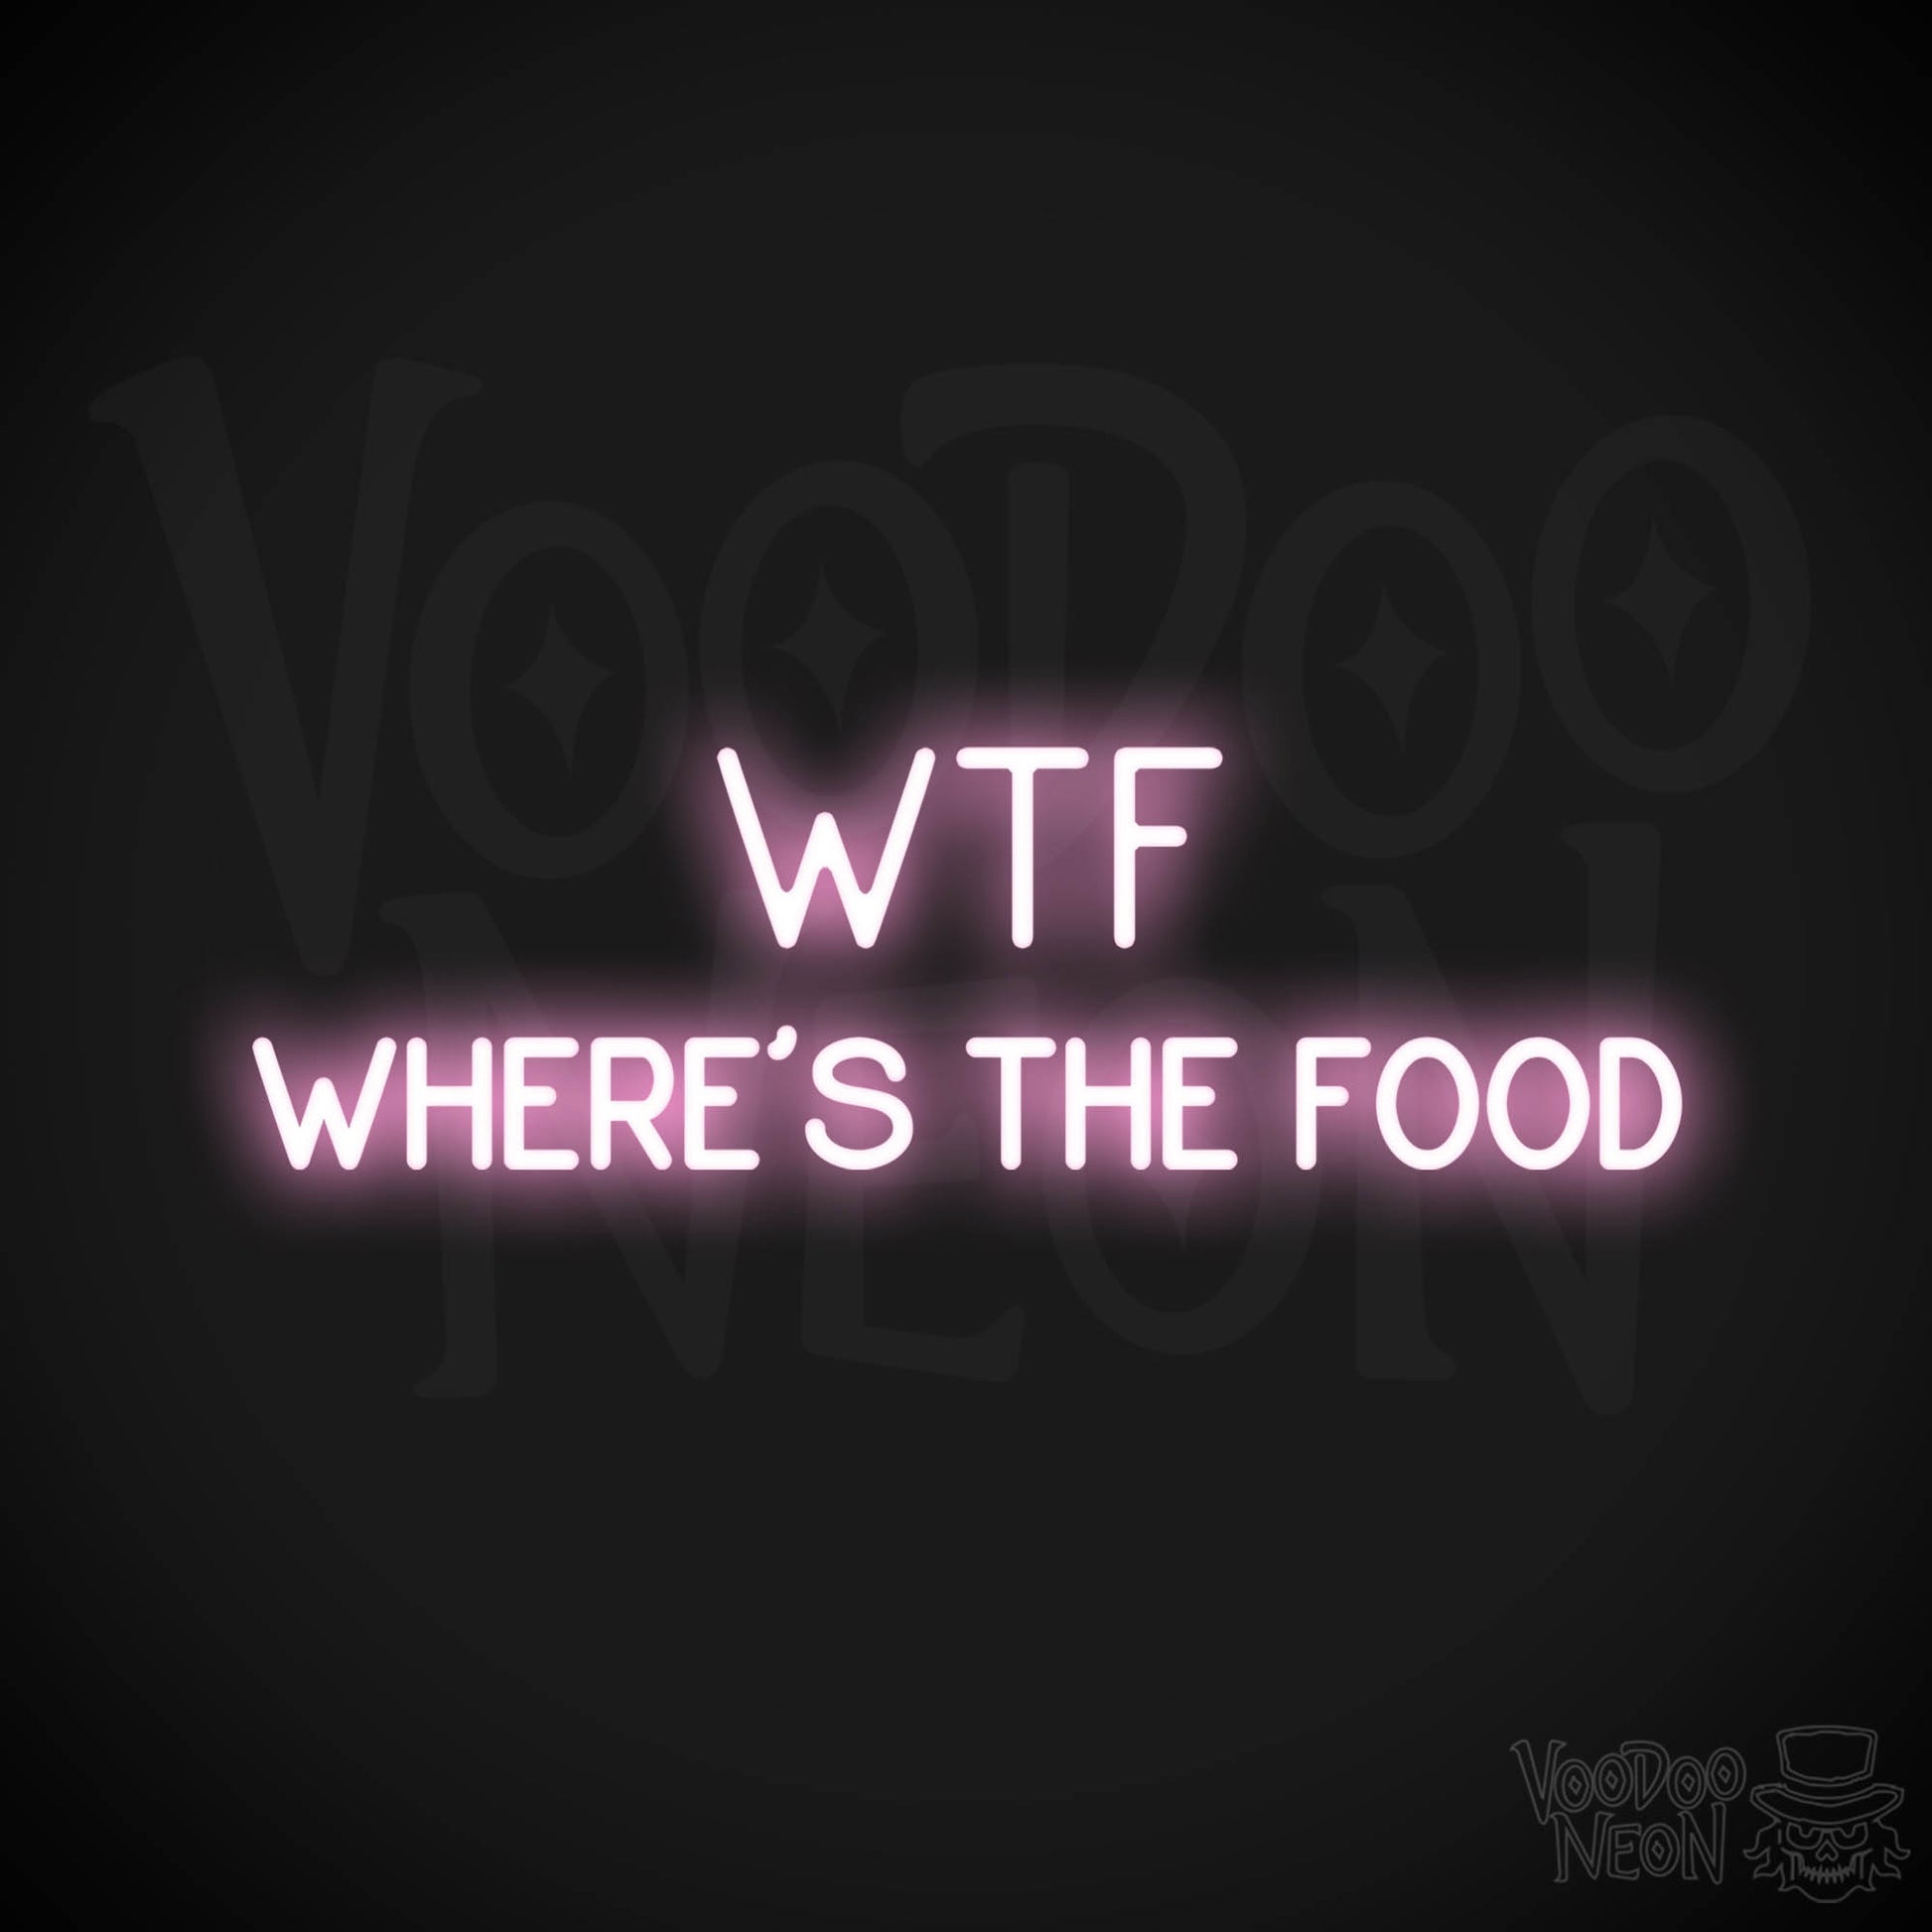 Wtf (Wheres The Food) LED Neon - Light Pink